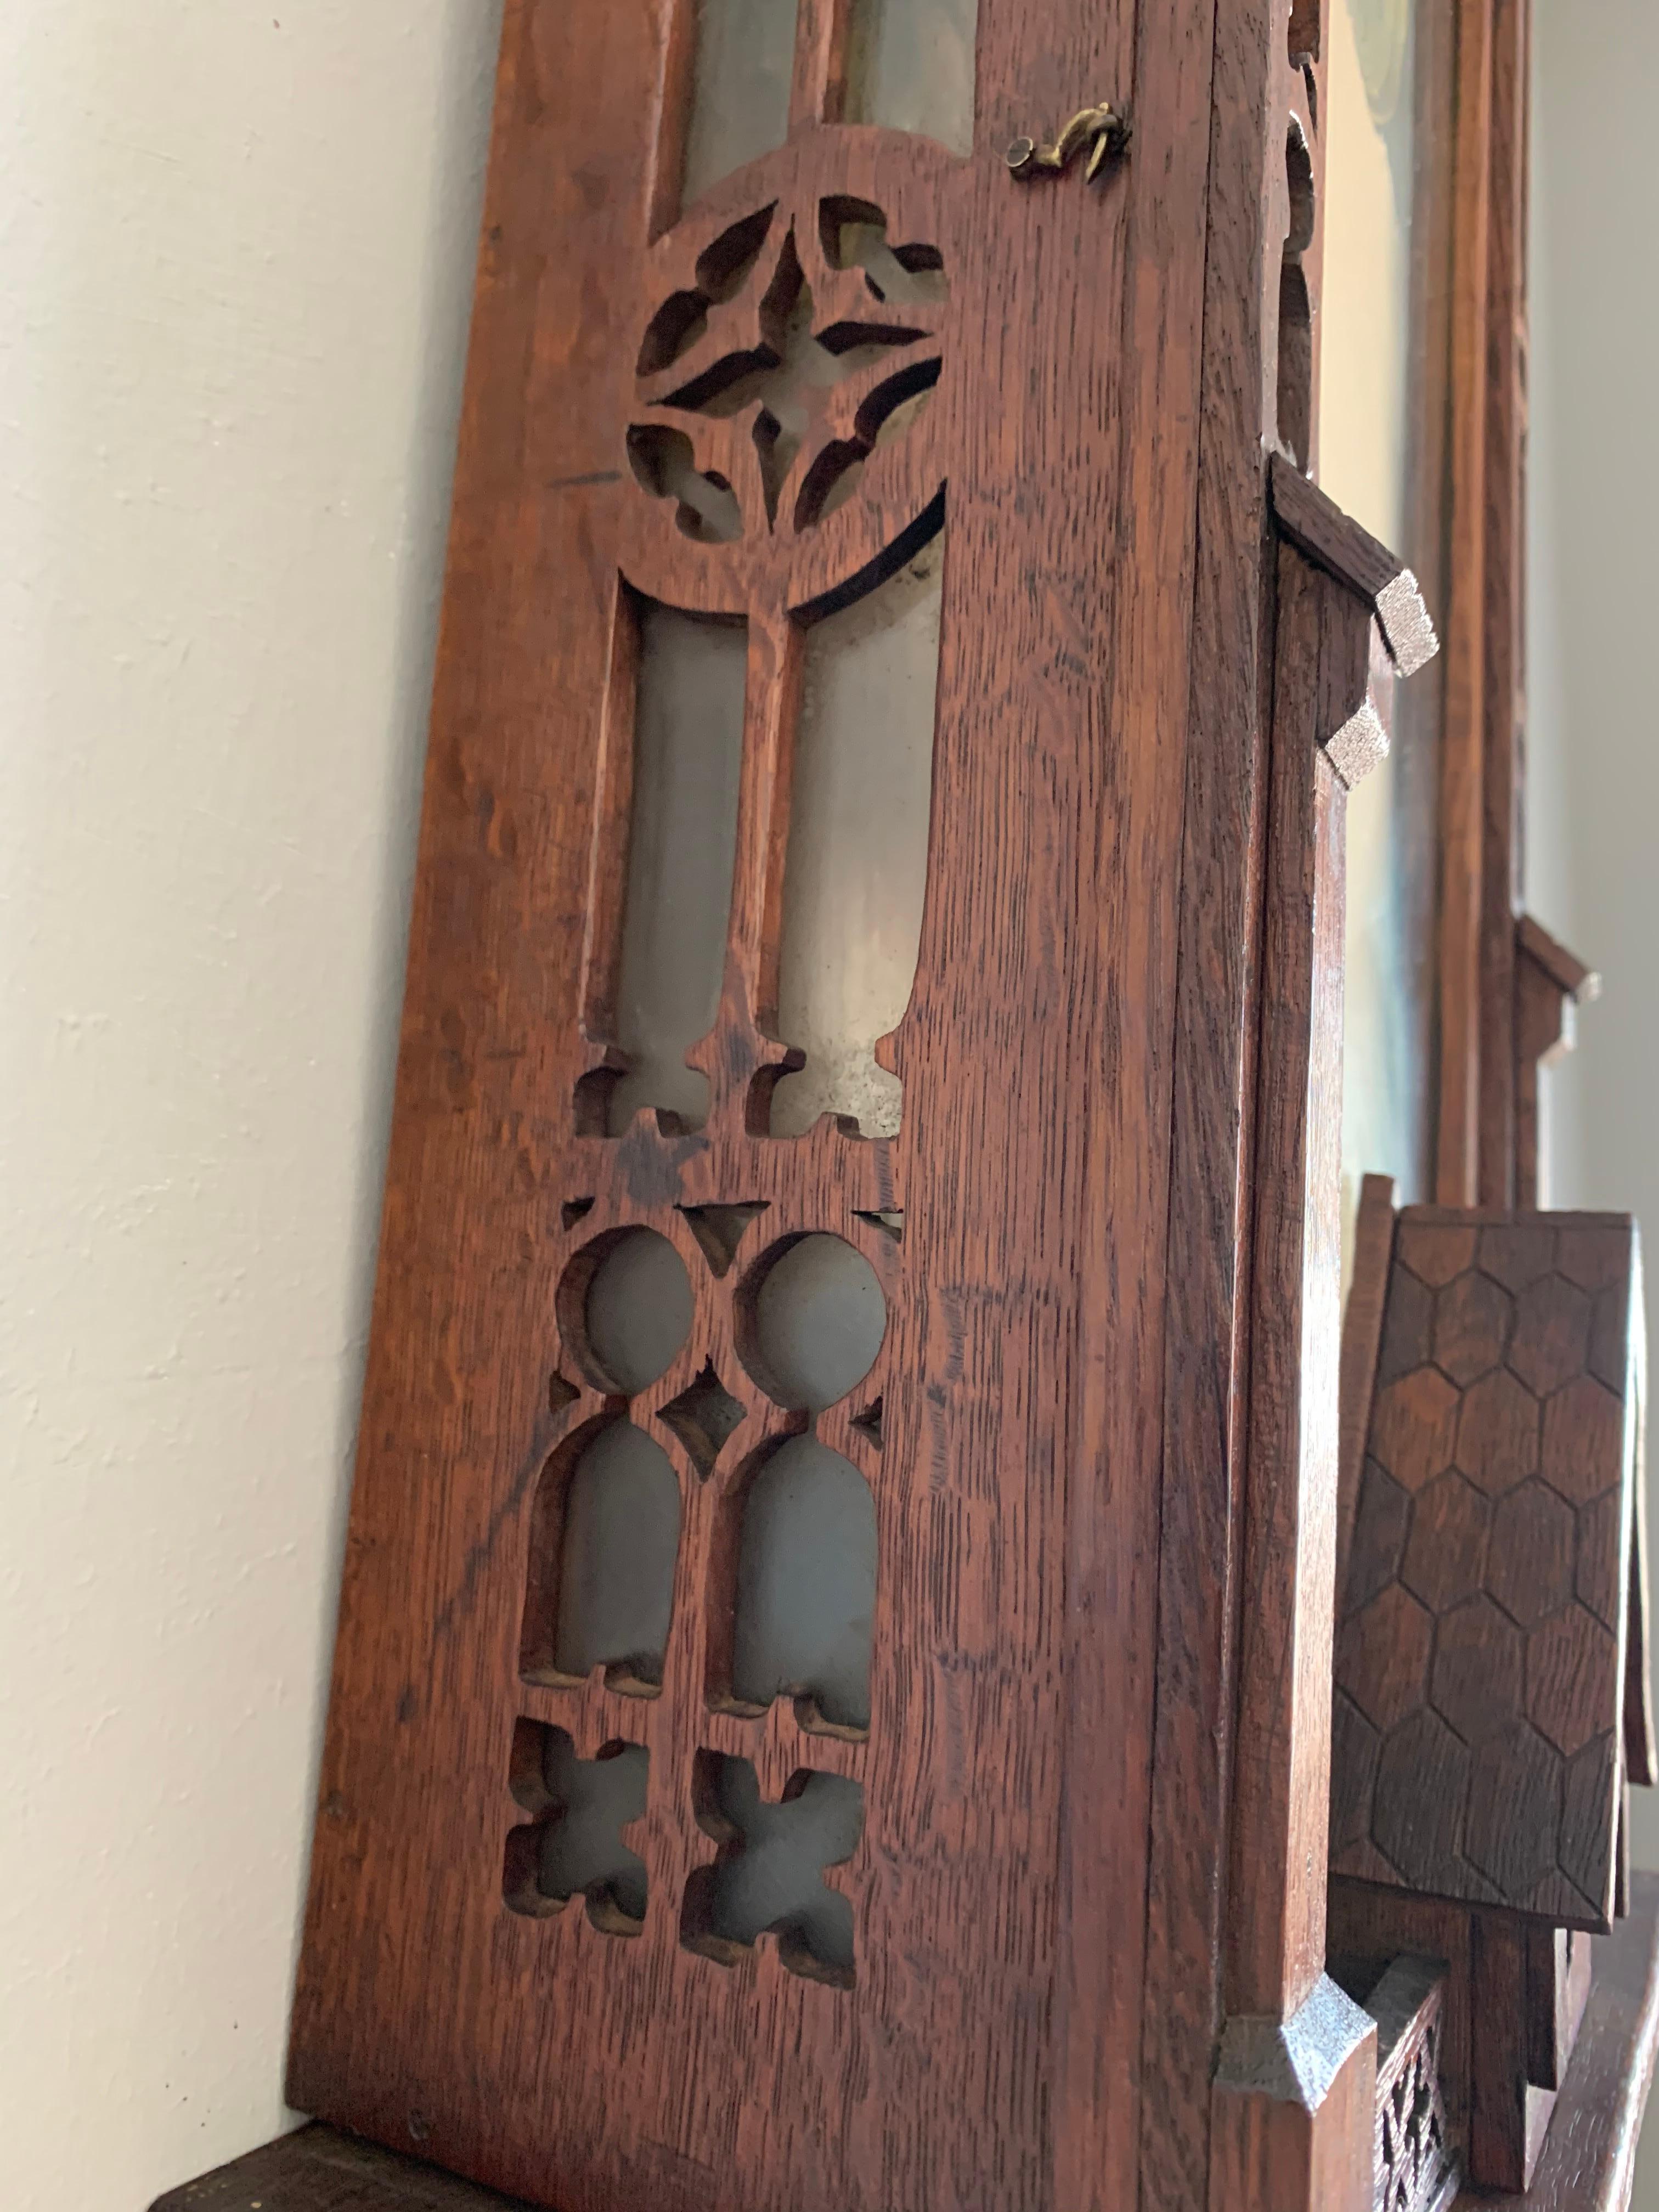 Hand-Crafted Unique, Large and All Handcrafted Early 20th Century Gothic Revival Wall Clock